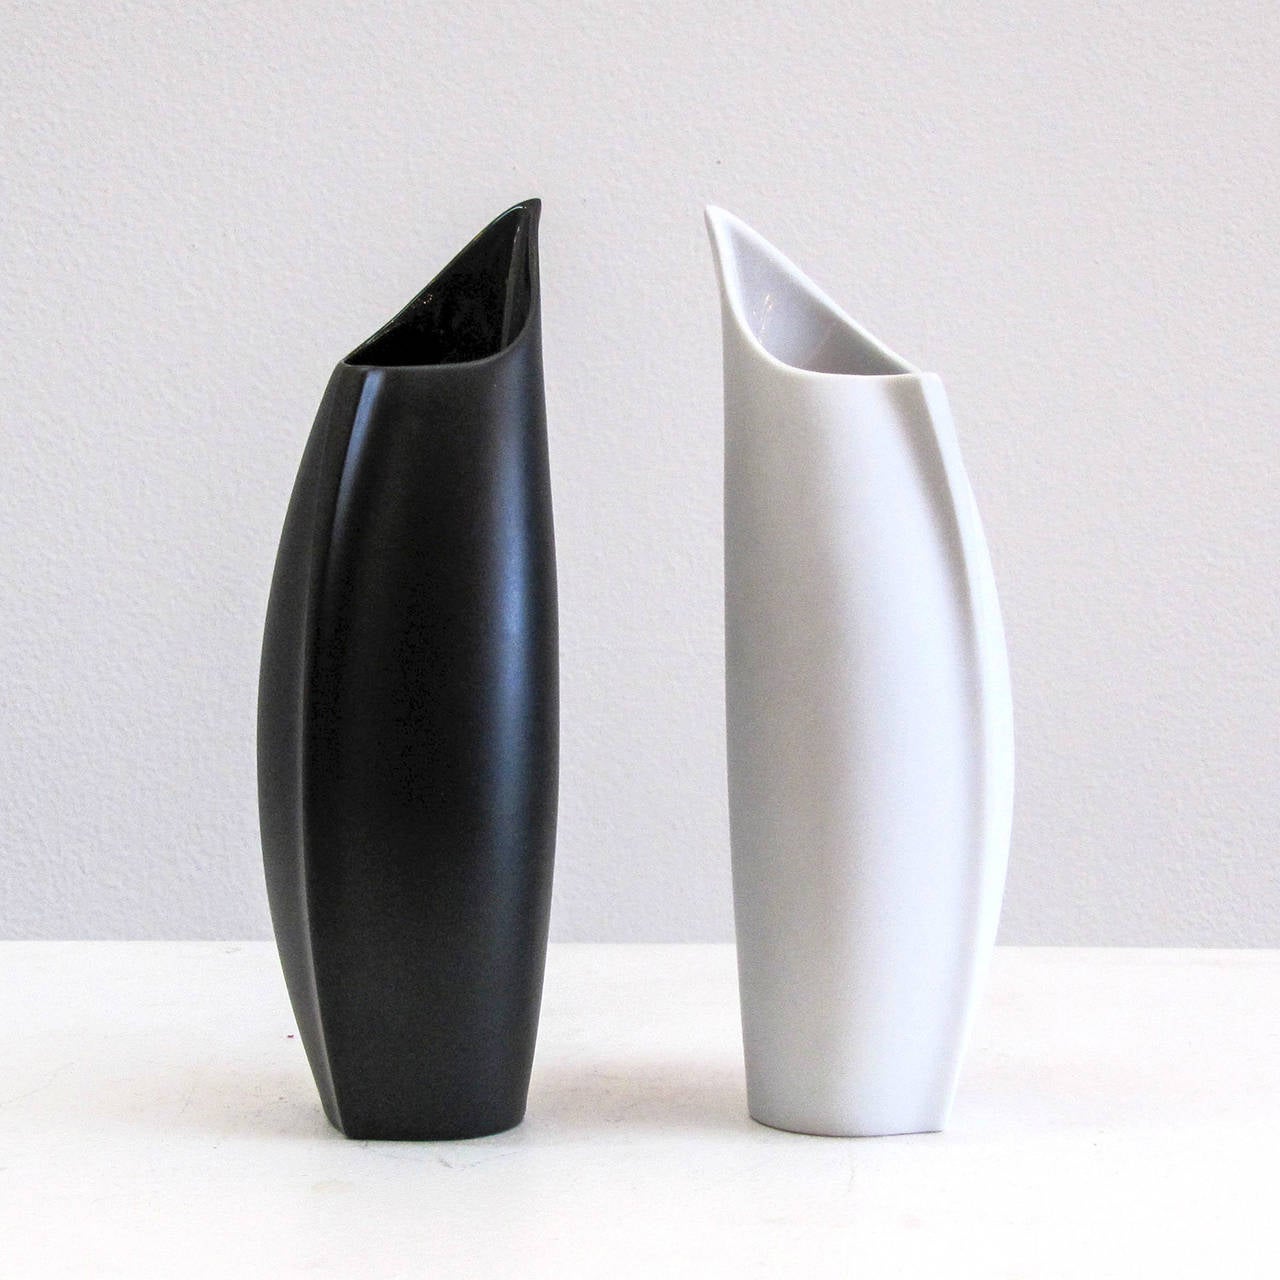 Two delicate porcelain vases by Lino Sabattini for Rosenthal, Germany, one black, one white vase in matte exterior and gloss interior finish, signed. Priced individually.